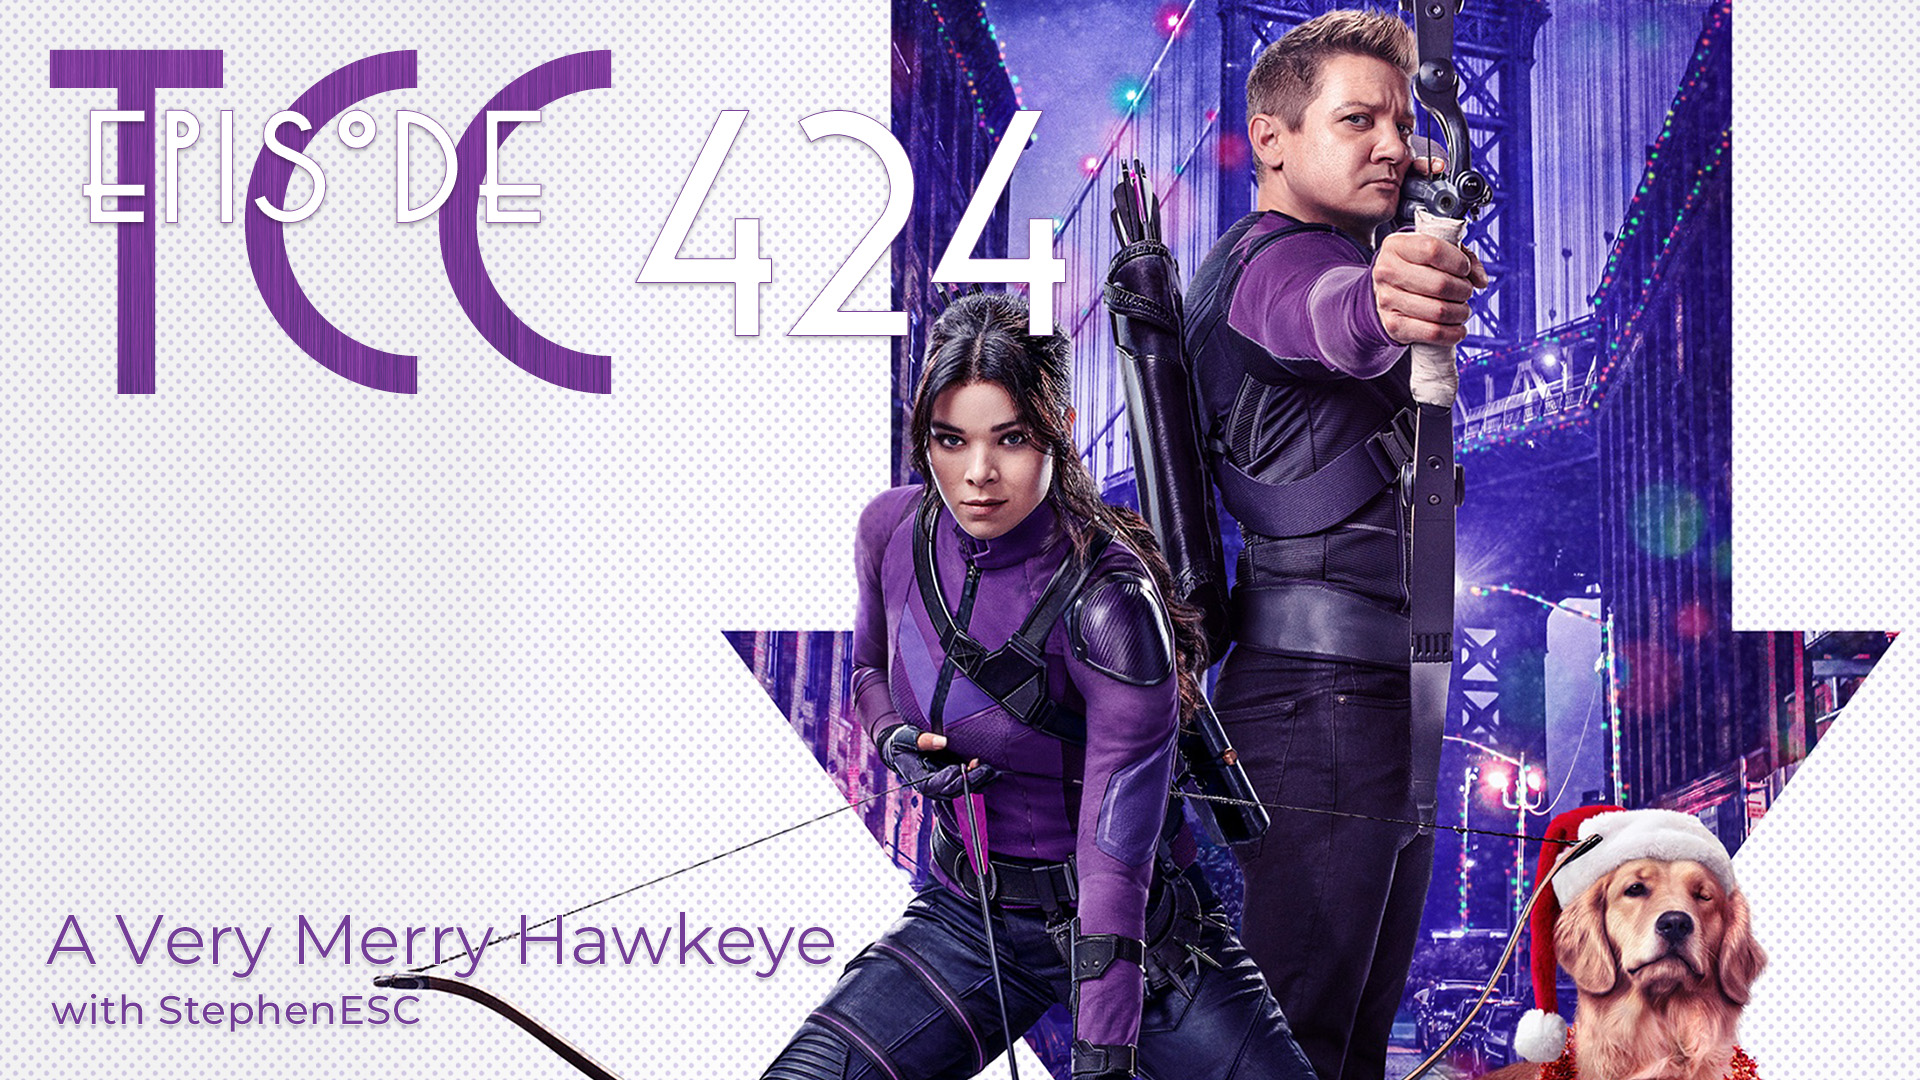 The Citadel Cafe 424: A Very Merry Hawkeye